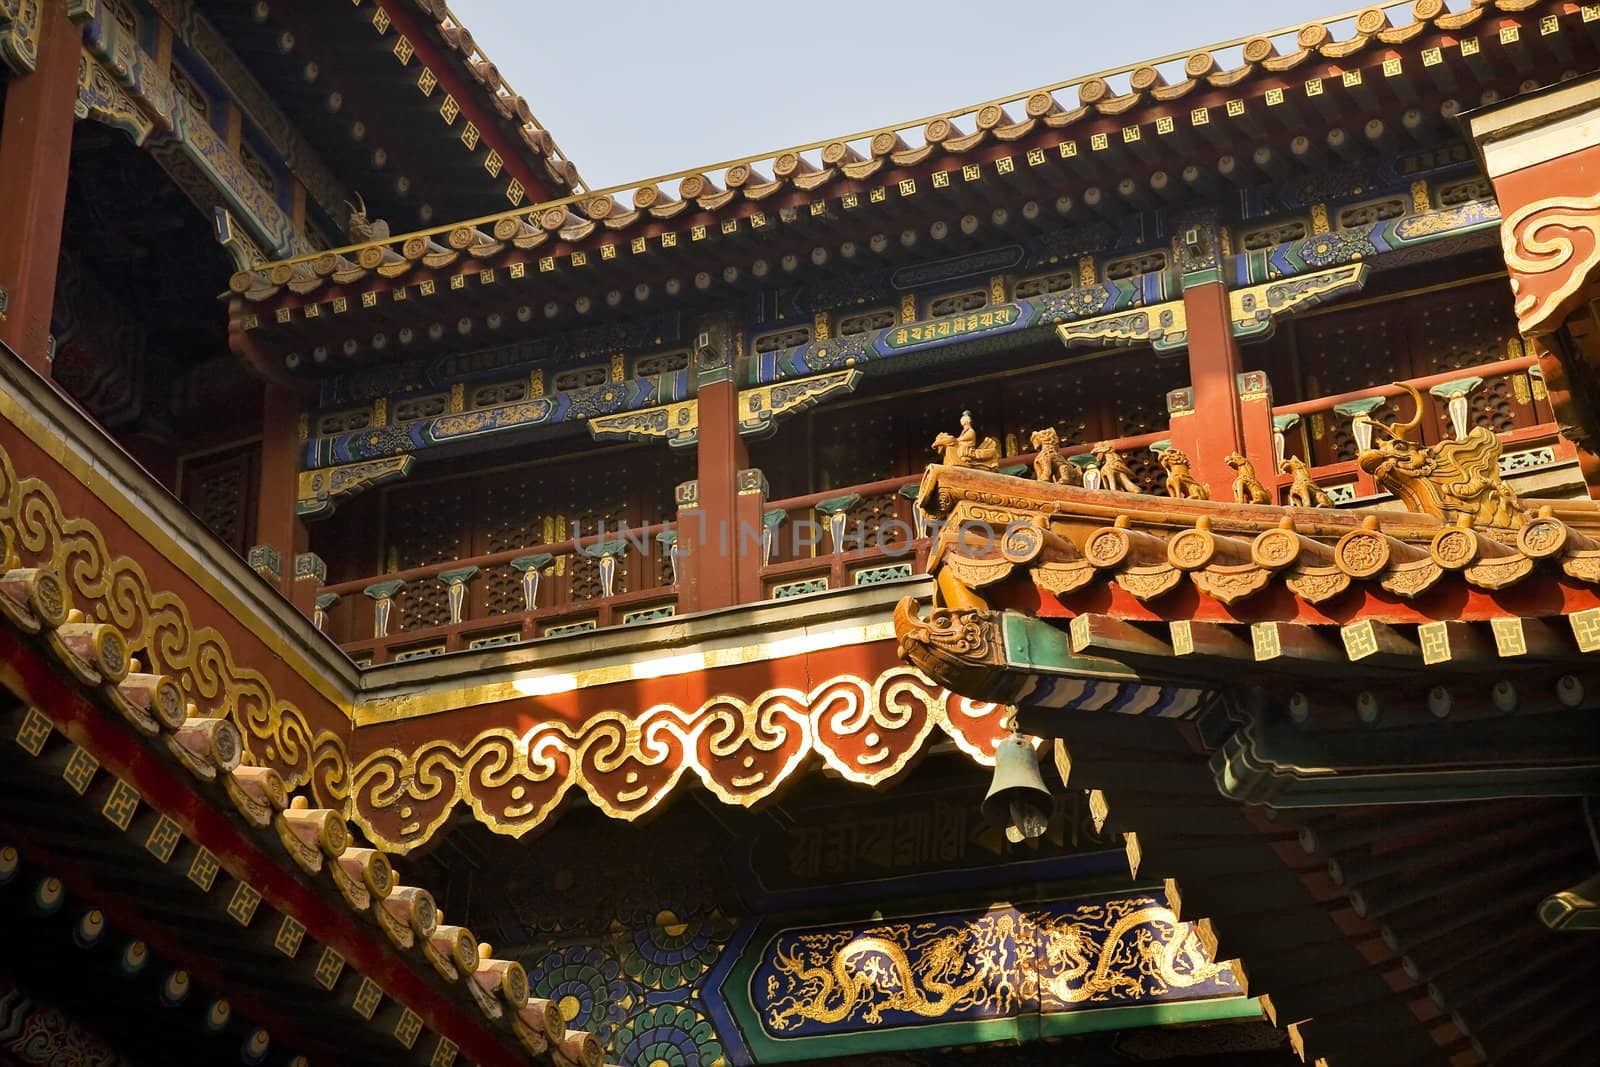 Roofs Figures Decorations Yonghe Gong Buddhist Lama Temple Beijing China Built in 1694, Yonghe Gong is the largest Buddhist Temple in Beijing.